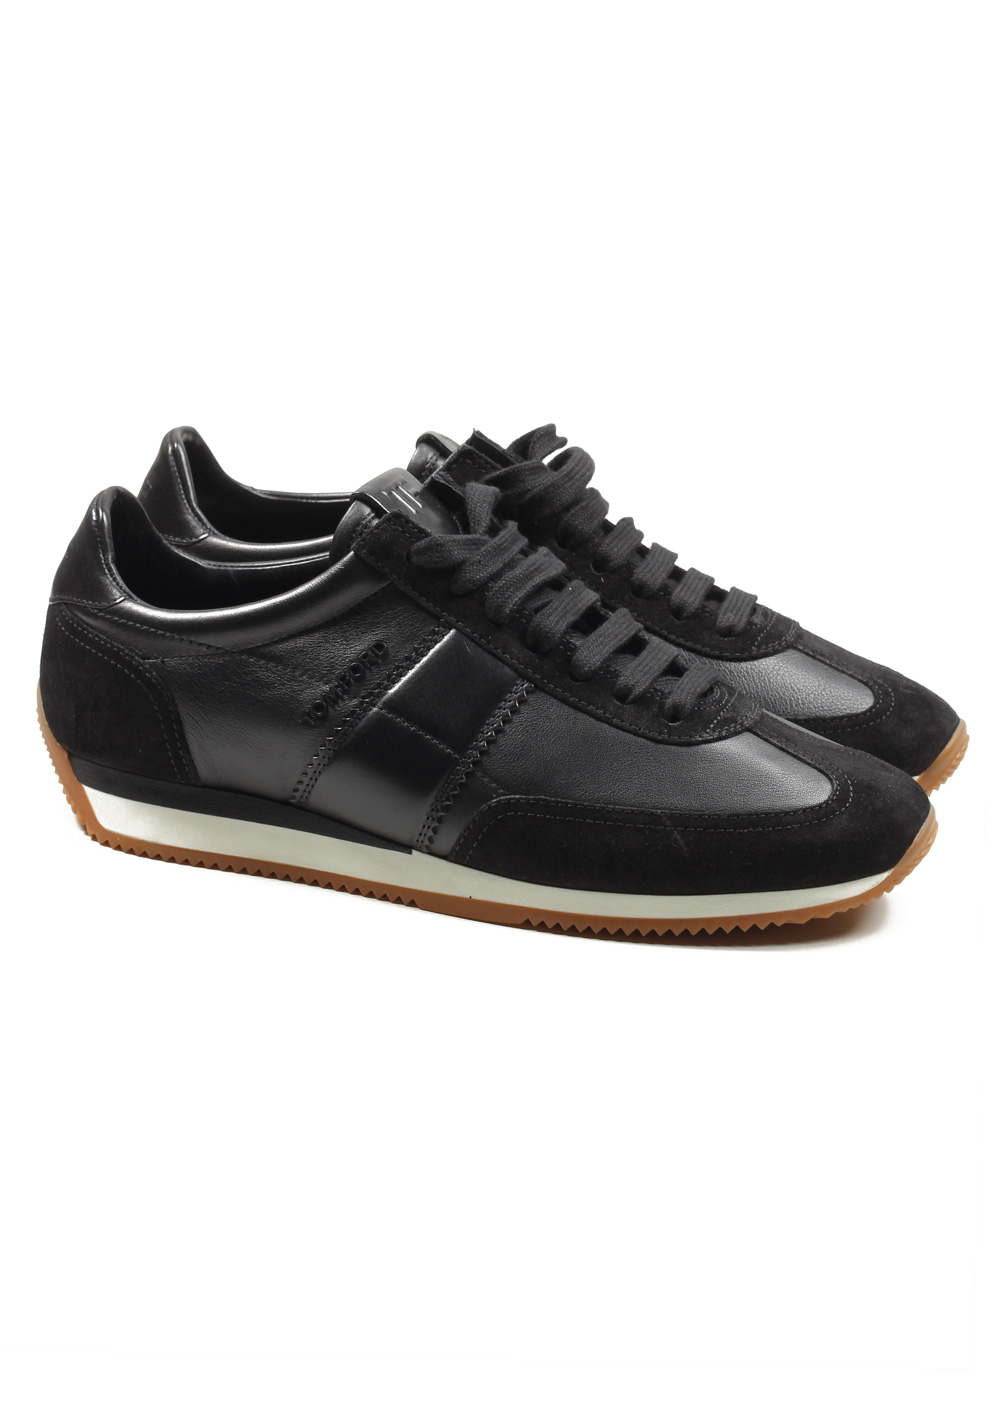 TOM FORD Orford Colorblock Suede Black Trainer Sneaker Shoes Size 10 UK / 11 U.S. | Costume Limité